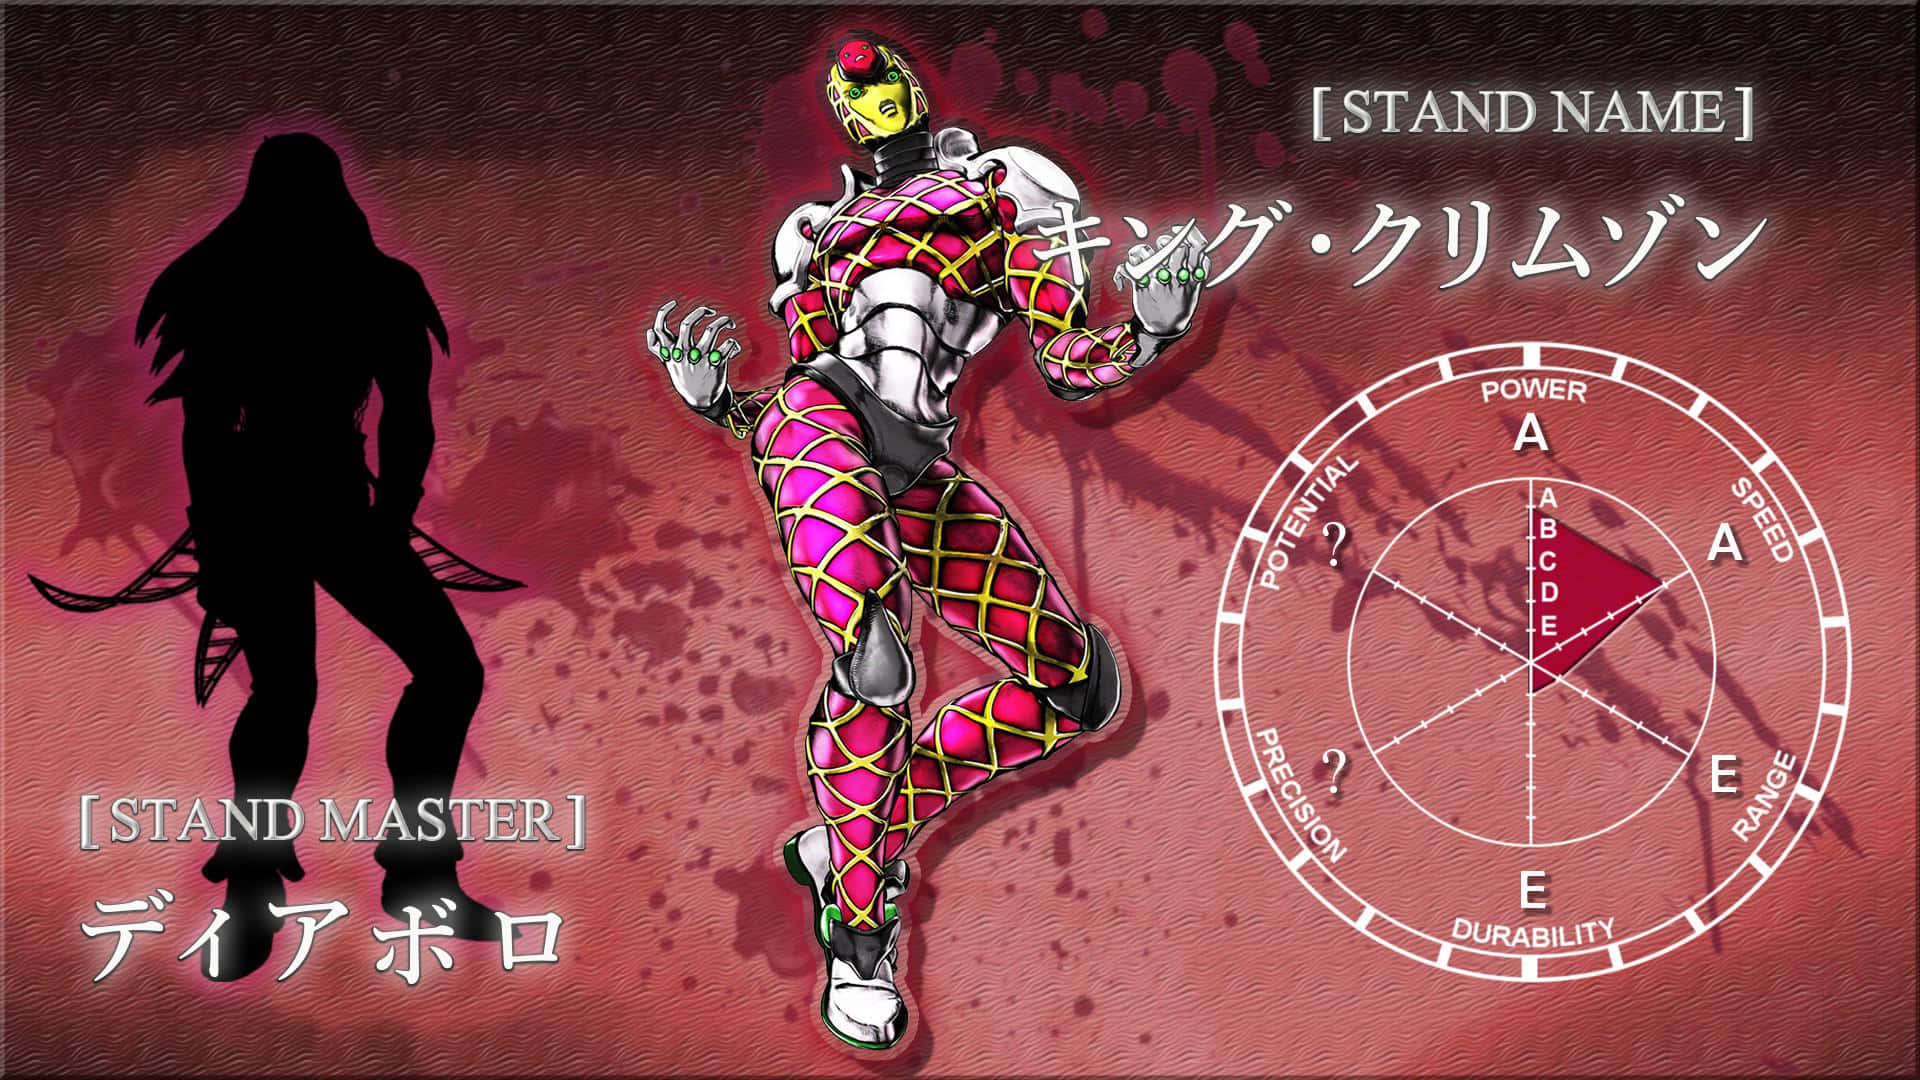 Jojo'sbizarre Adventure Diavolo Golden Wind Form (or Jojo's Seltsames Abenteuer Diavolo Golden Wind Form In German) Would Be A Popular Choice For A Computer Or Mobile Wallpaper Among Fans Of The Anime/manga Series. The Bold And Colorful Artwork Featuring The Character Diavolo In His 